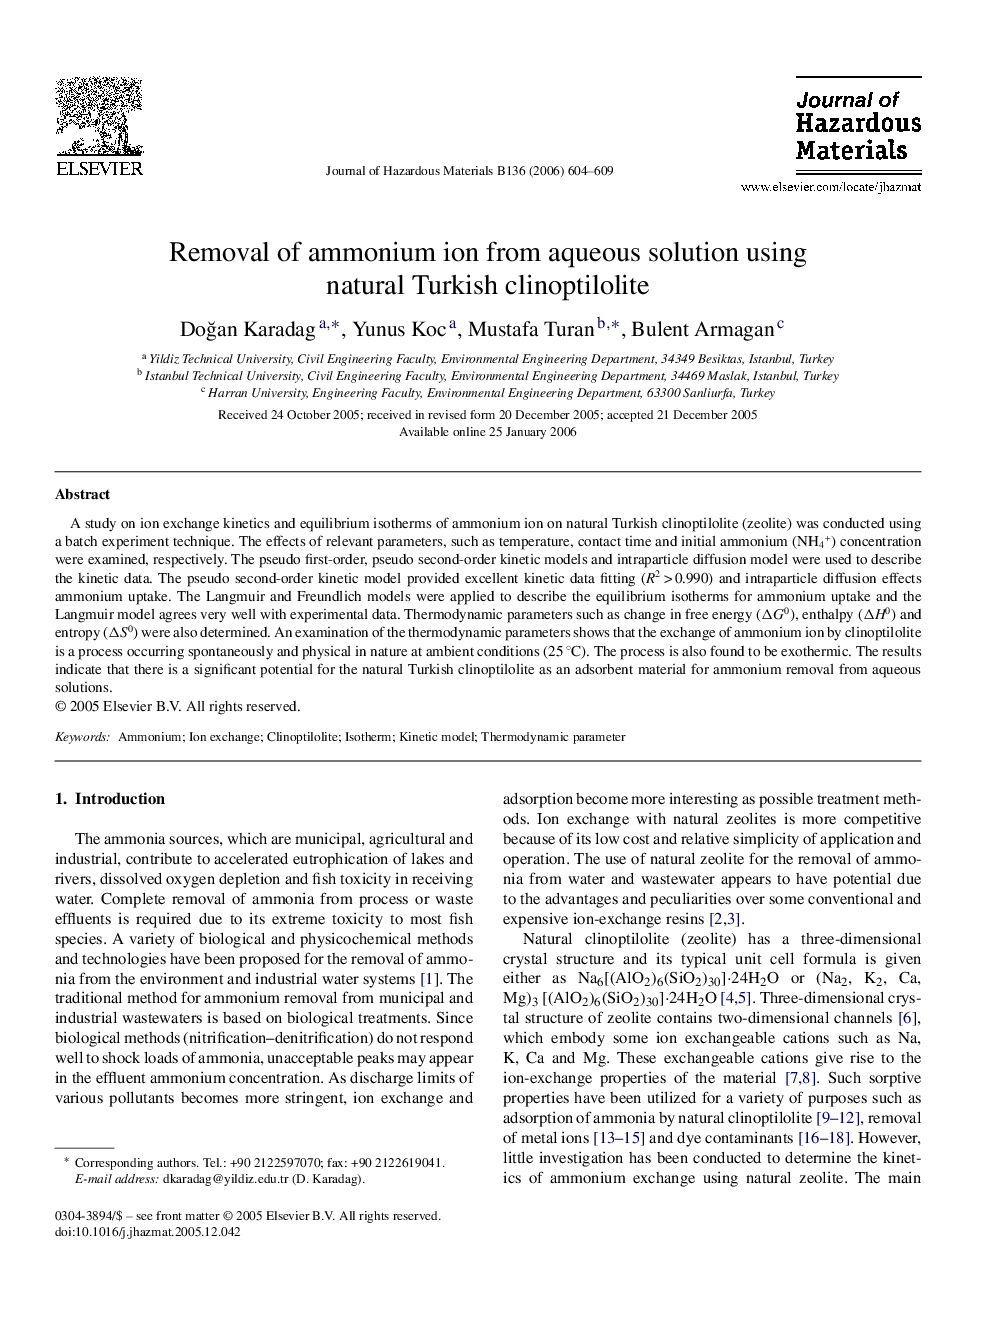 Removal of ammonium ion from aqueous solution using natural Turkish clinoptilolite